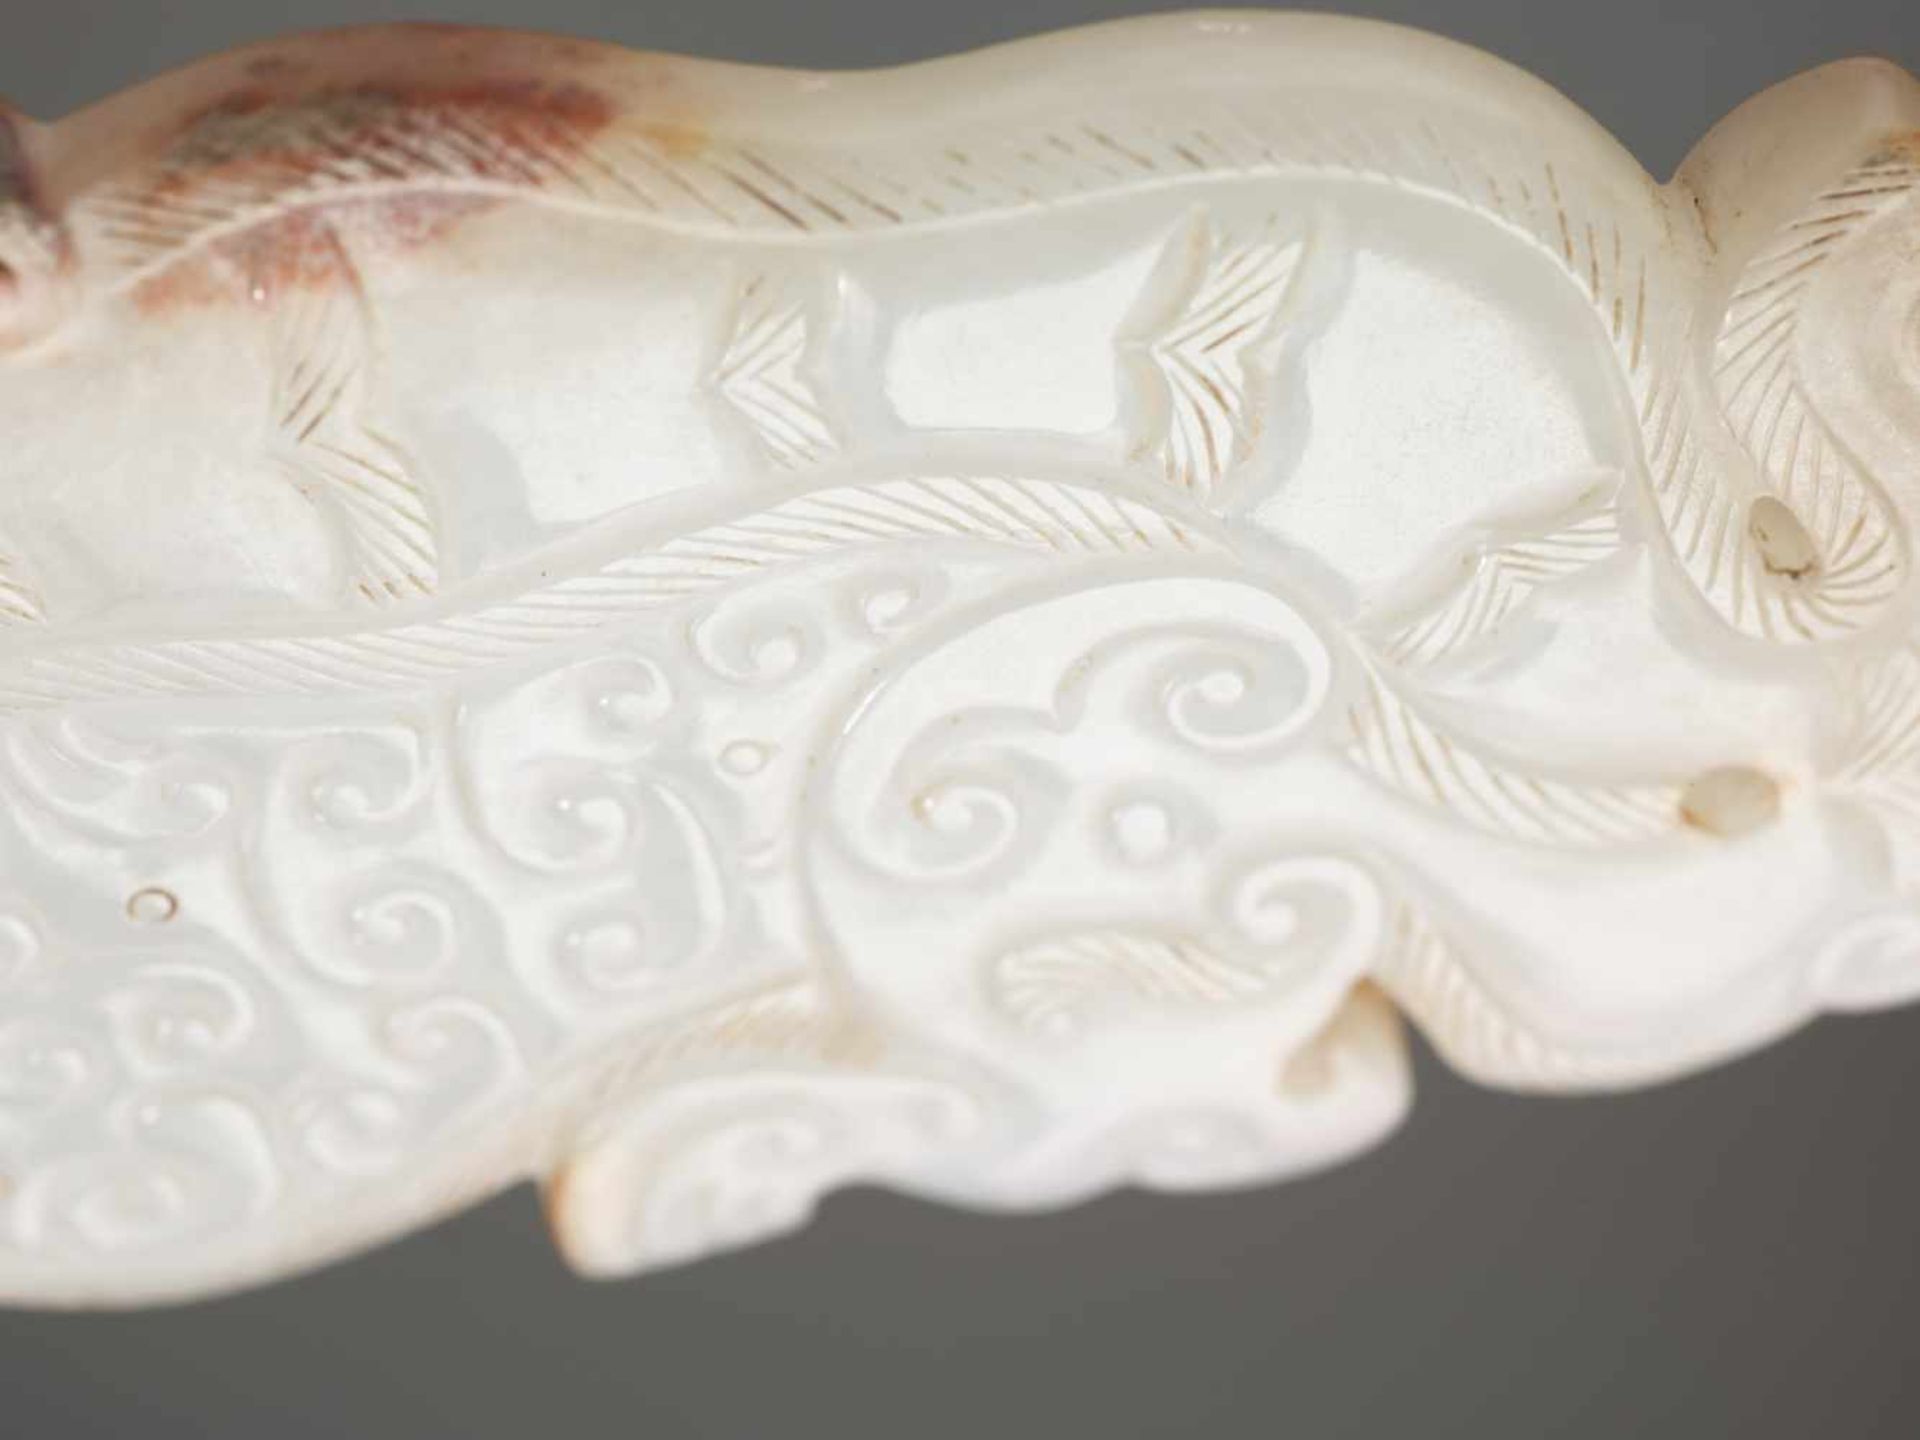 A MAGNIFICENT EASTERN ZHOU CROUCHING TIGER IN EXQUISITE PURE WHITE JADE Jade. China, Eastern Zhou, - Image 4 of 5